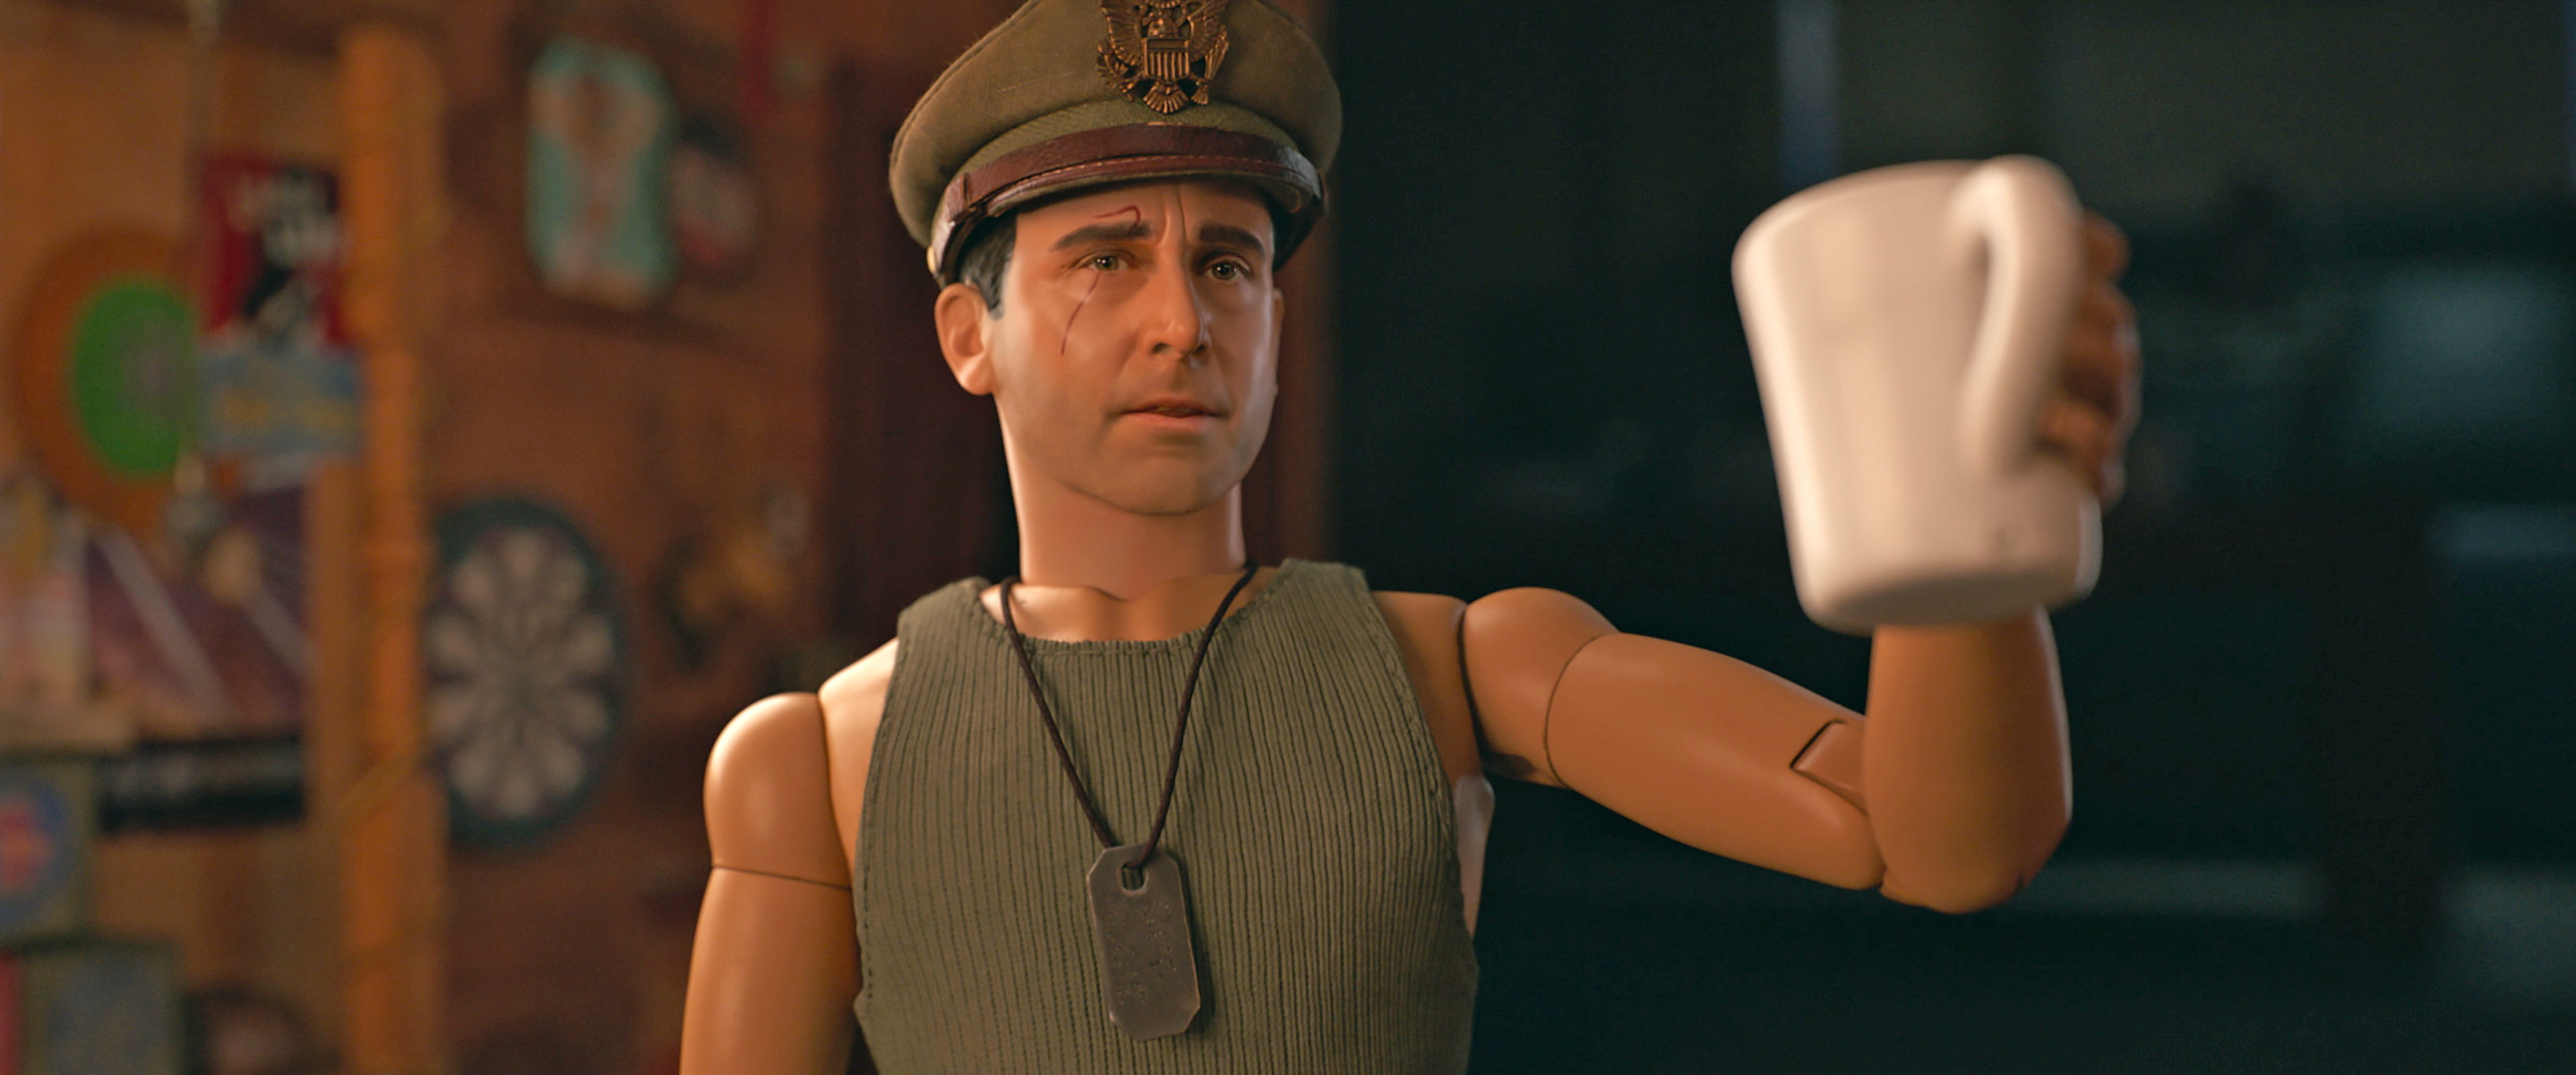 Welcome to Marwen review, Robert Zemeckis film, Uncanny valley, Dolls and art, 2880x1200 Dual Screen Desktop